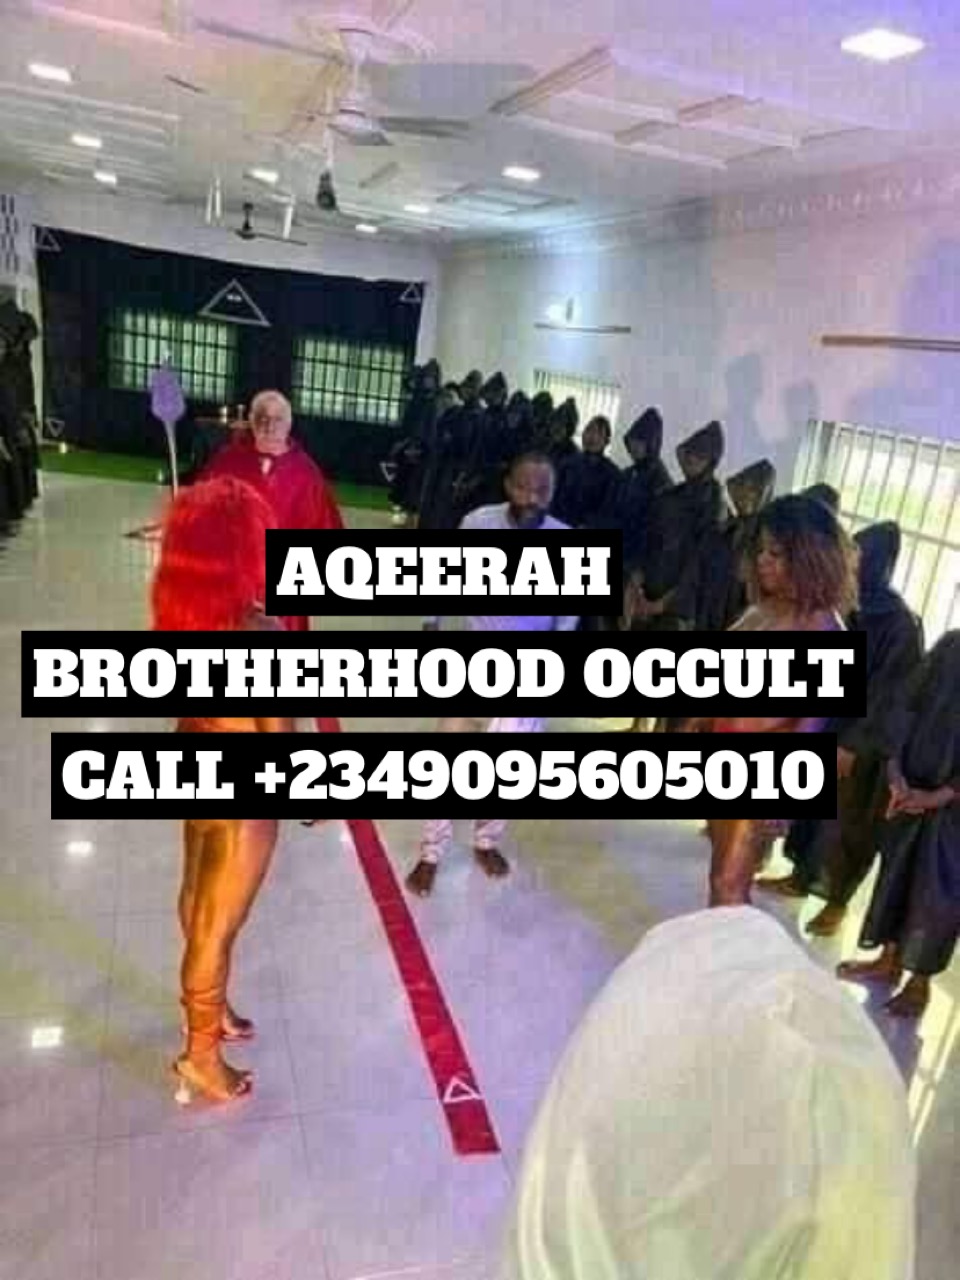 THIS IS HOW TO JOIN BROTHERHOOD OCCULT FOR INSTANT WEALTH PROTECTION PROMOTION SUCCESS AND PROSPERITY WITHOUT KILLING ANYONE CALL +2349095605010